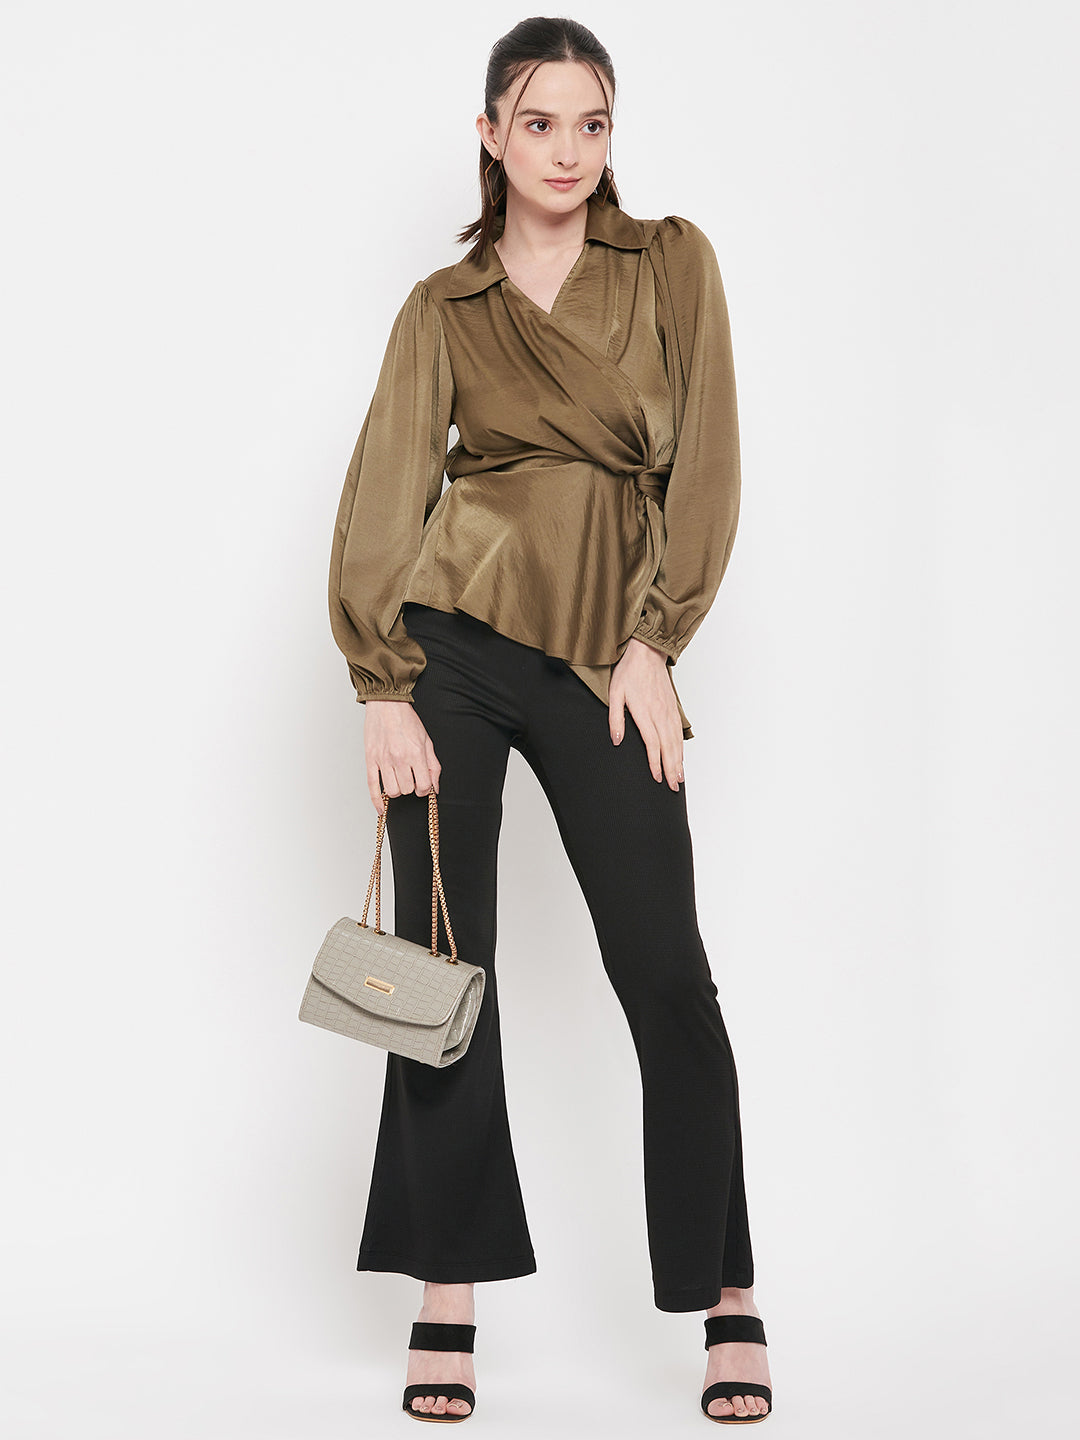 Camla Barcelona Olive Green Top For Women